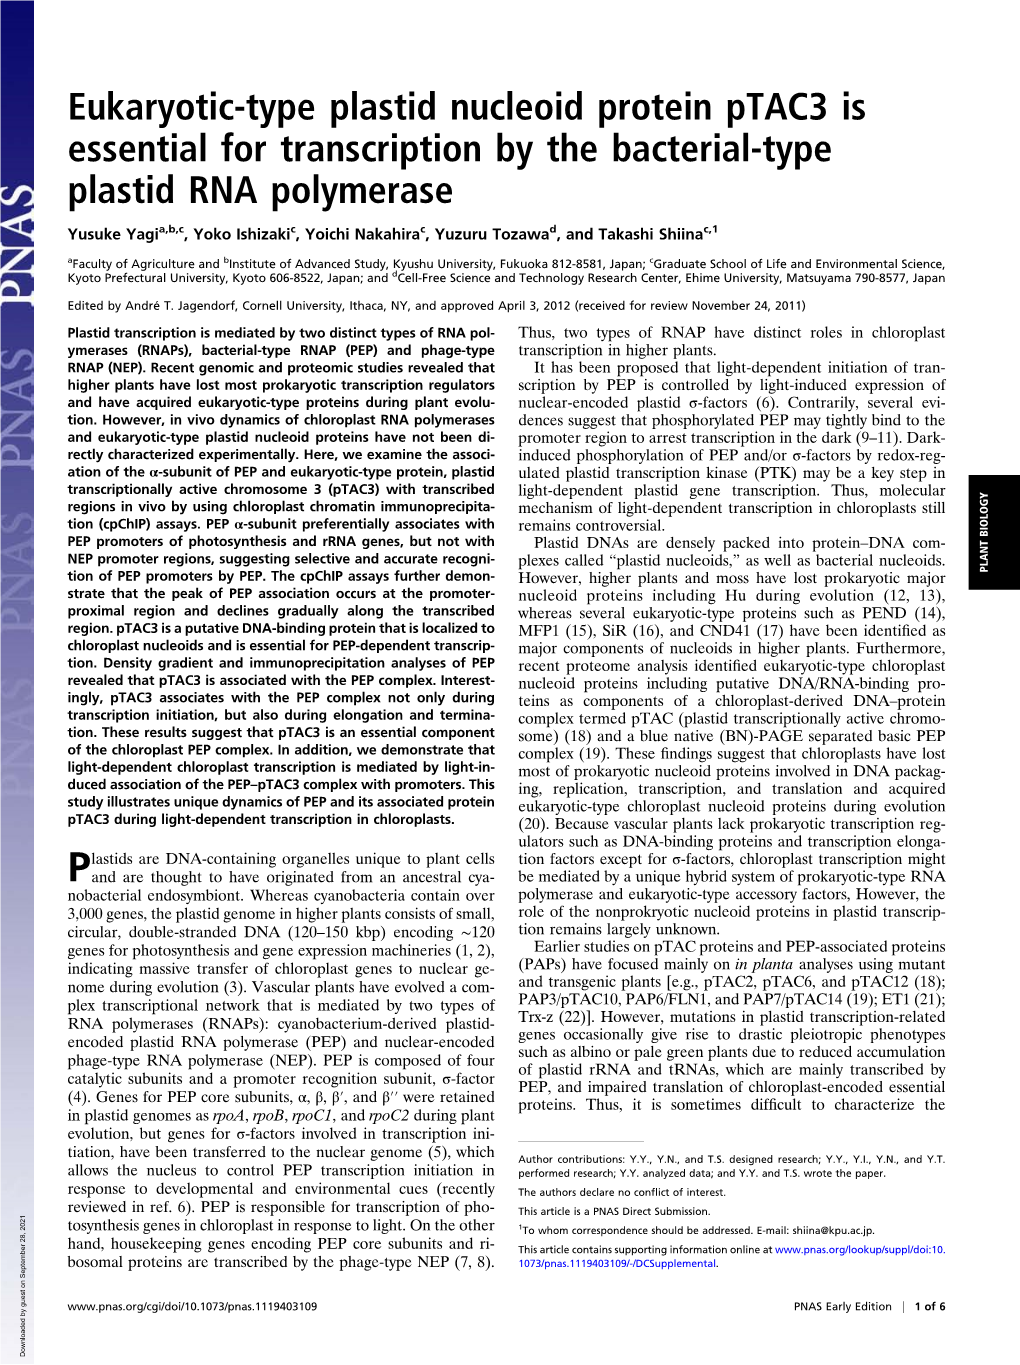 Eukaryotic-Type Plastid Nucleoid Protein Ptac3 Is Essential for Transcription by the Bacterial-Type Plastid RNA Polymerase